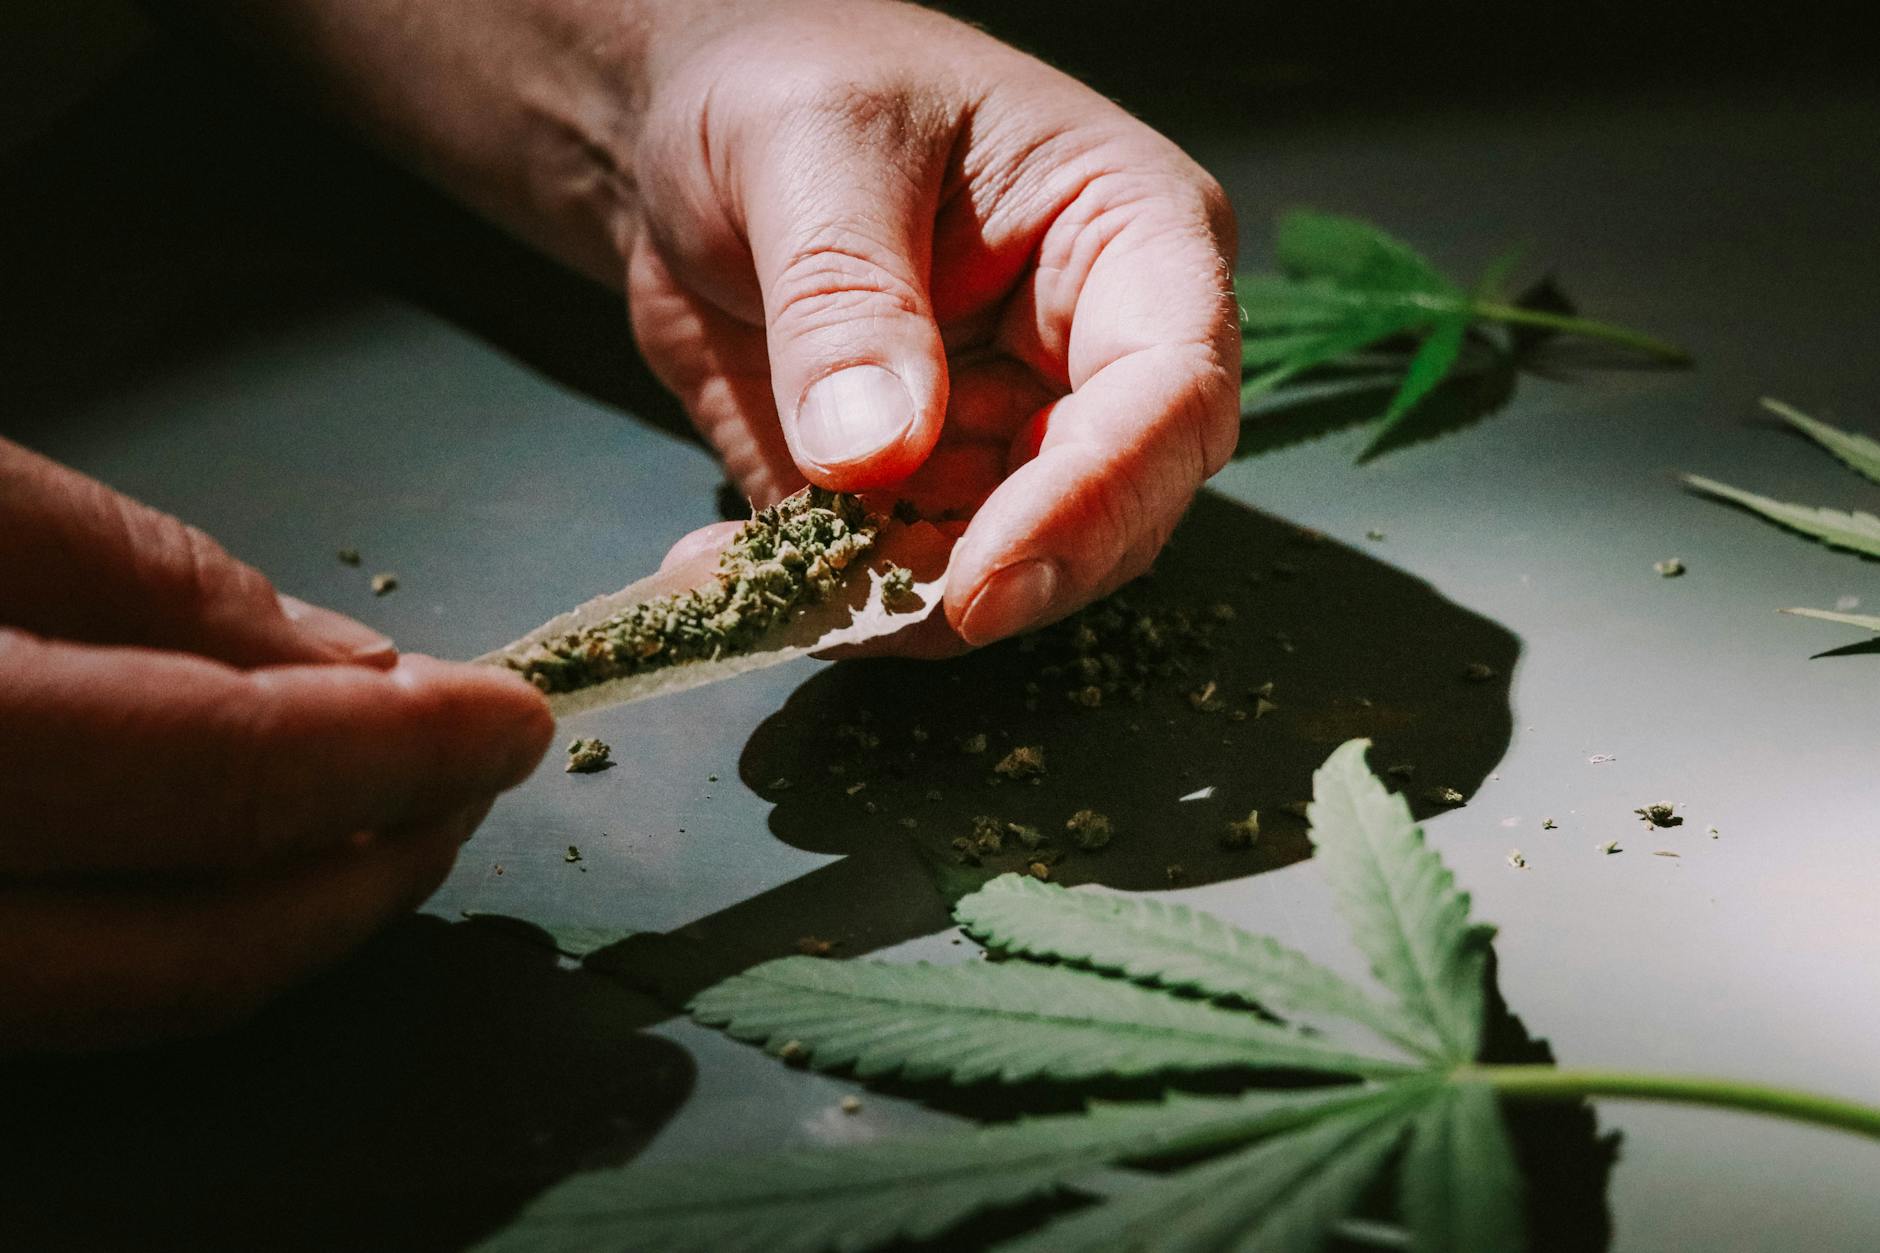 The Therapeutic Potential: Unearthing the Benefits of Using Cannabis for Medicinal Purposes